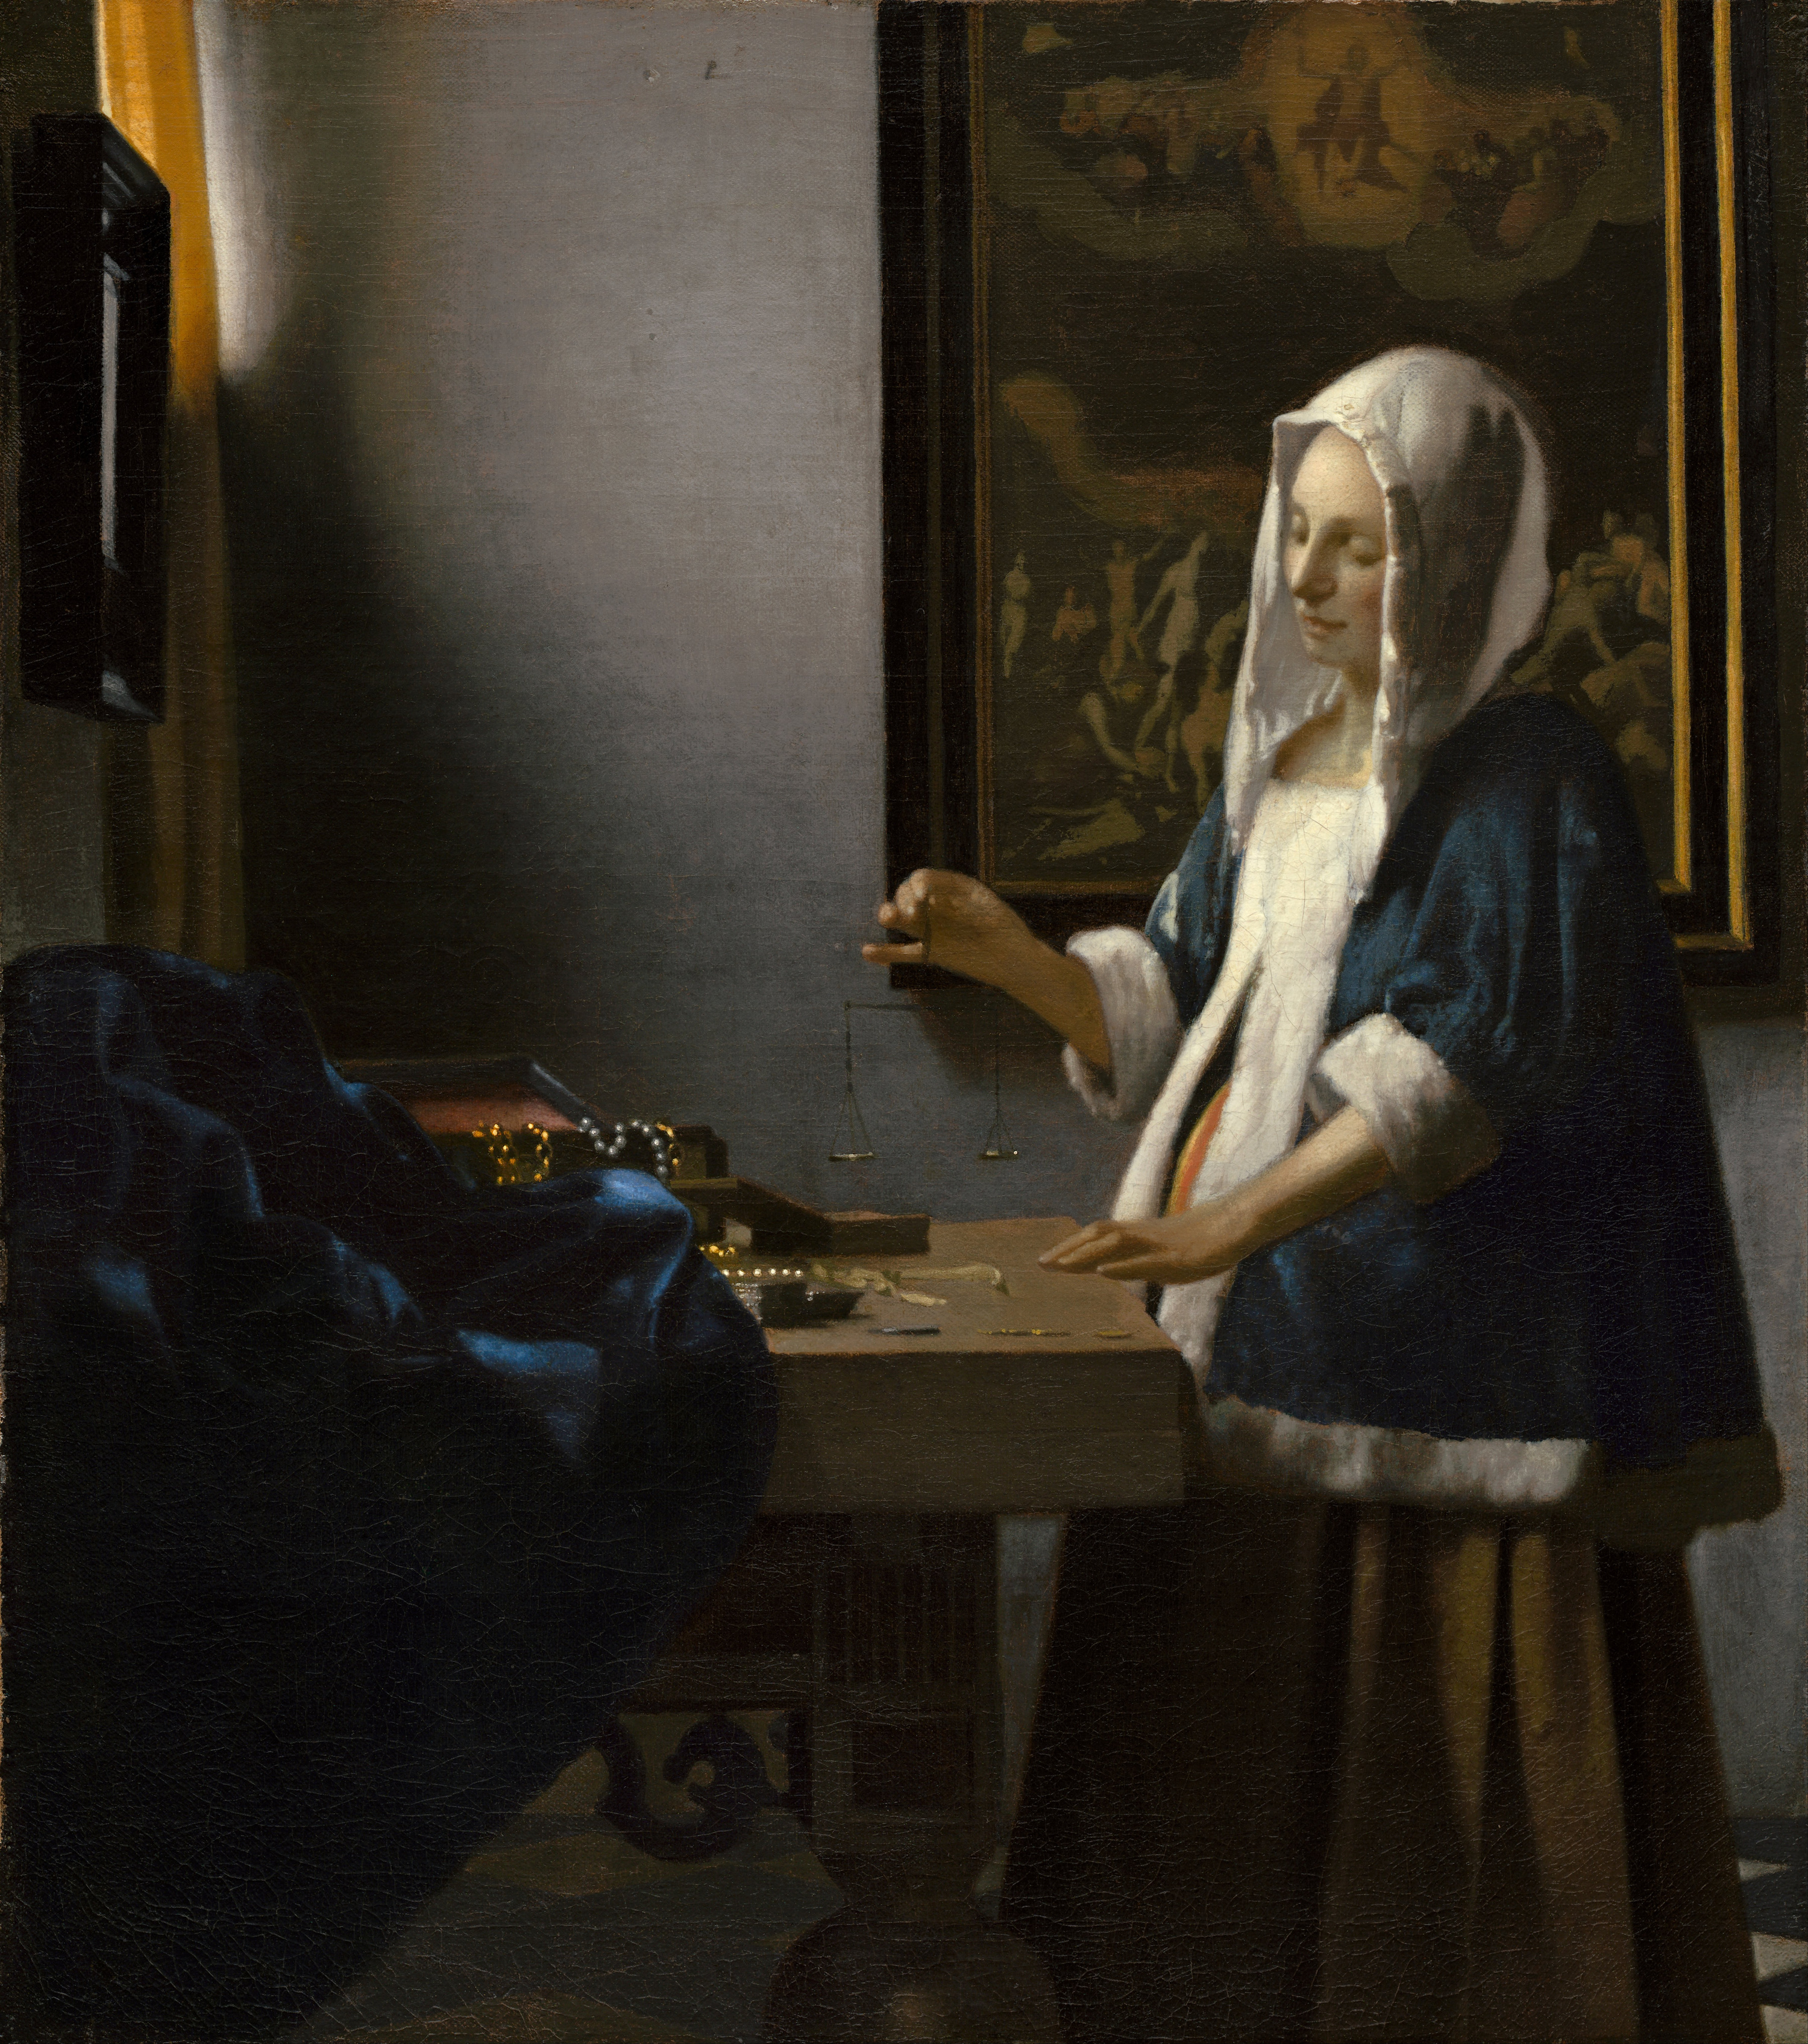 Woman Holding a Balance by Johannes Vermeer - c. 1664 - 39.7 x 35.5 cm National Gallery of Art